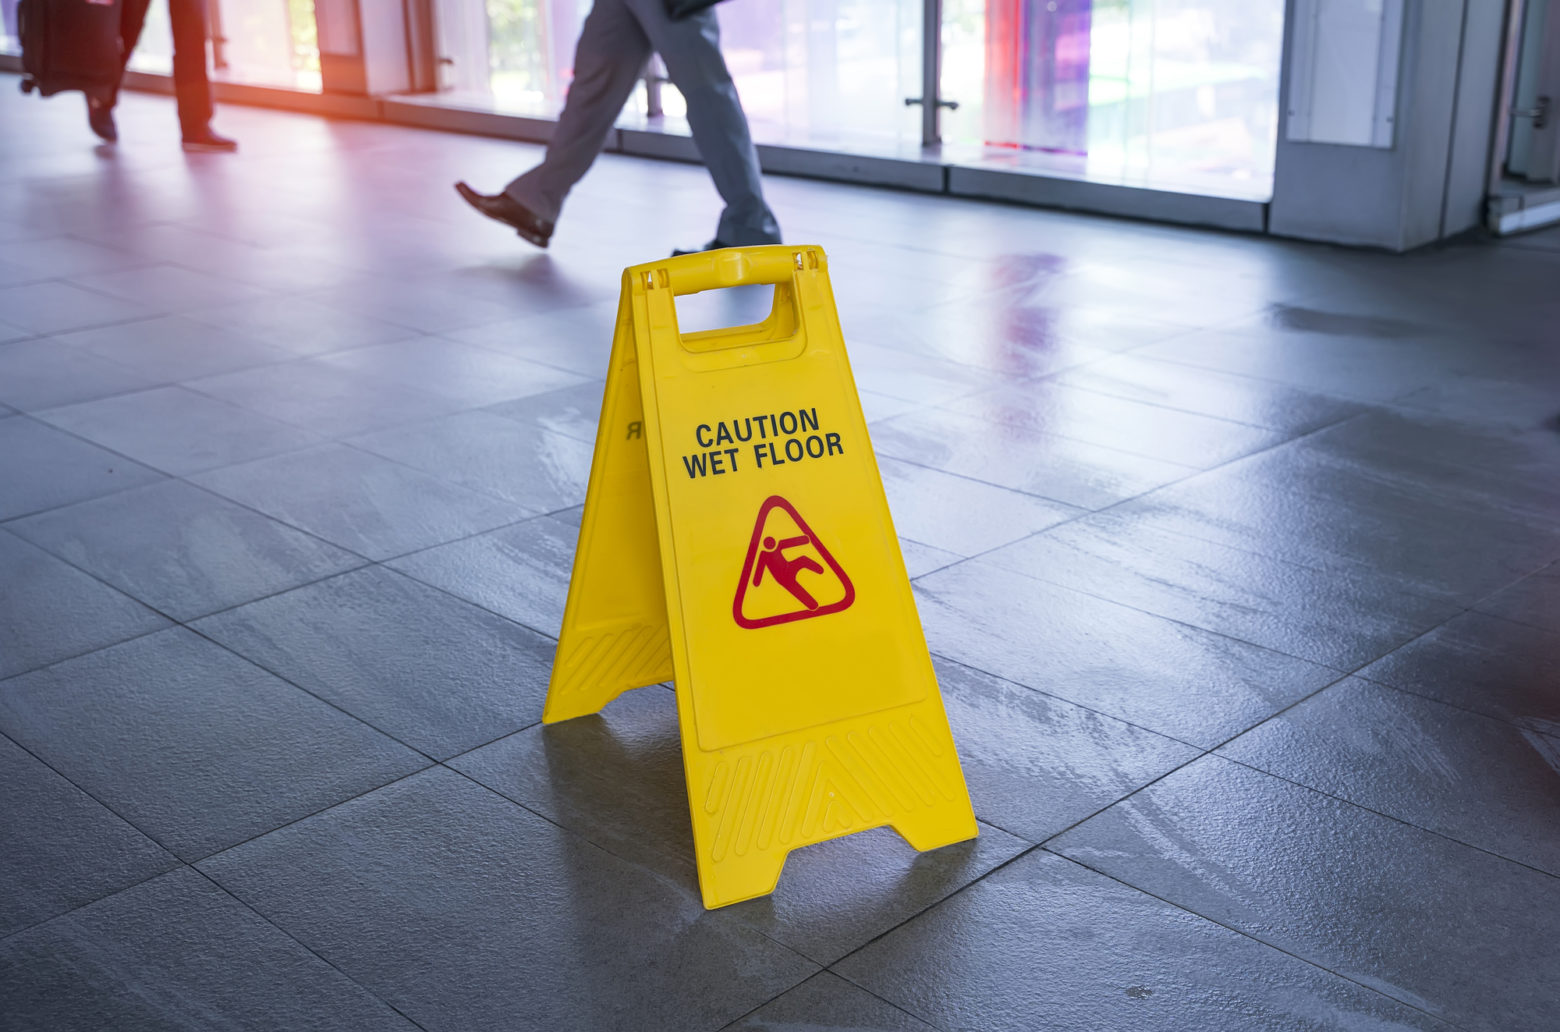 How To Prevent Slip And Fall Accidents - "Caution wet floor" sign